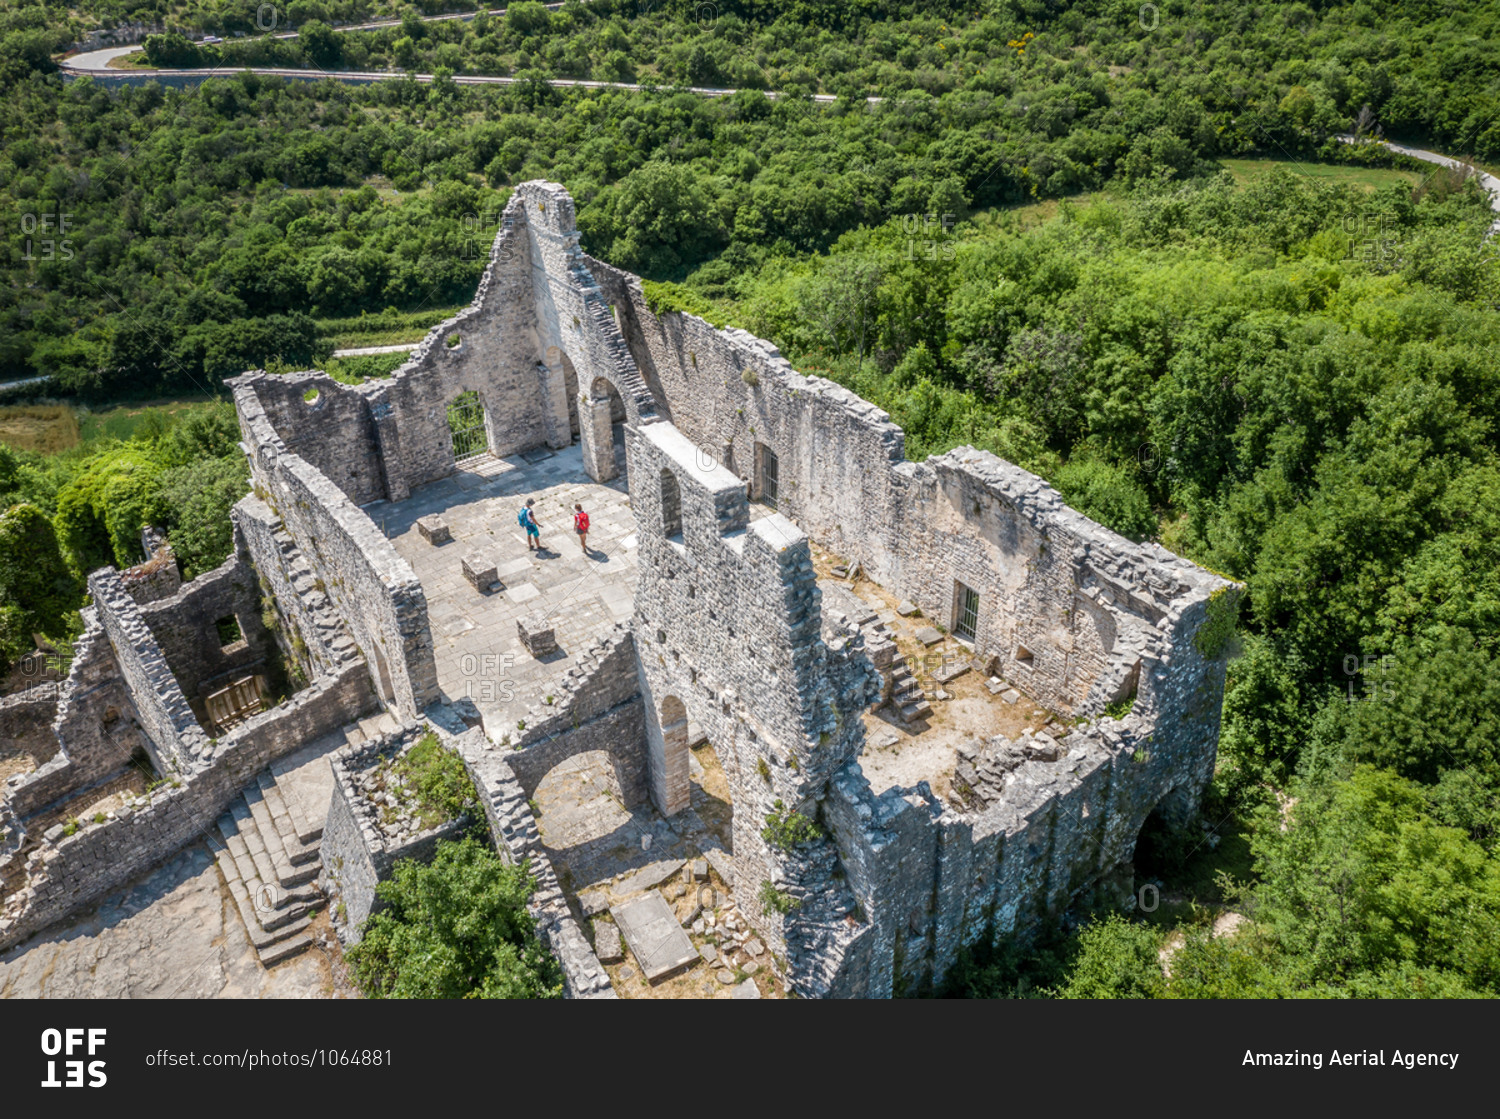 Aerial view of two tourists at Dvigrad ruins in Kanfanar, Croatia